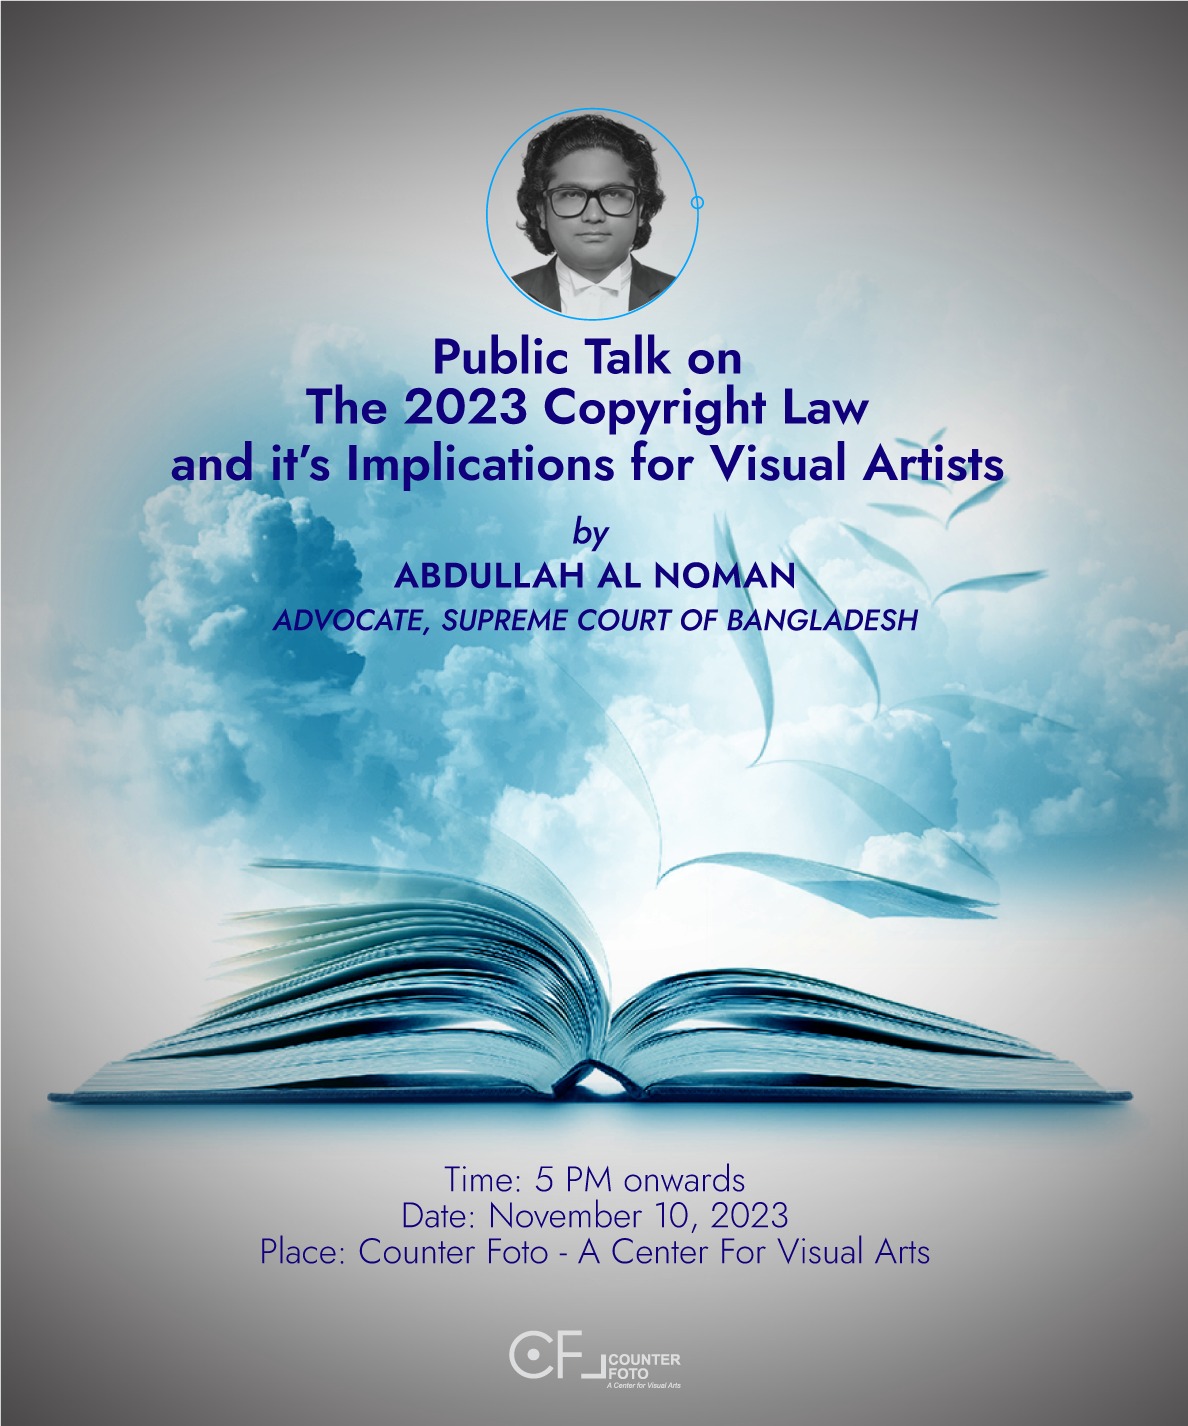 Public Talk on The 2023 Copyright Law and its Implications for Visual Artists by Abdullah Al Noman